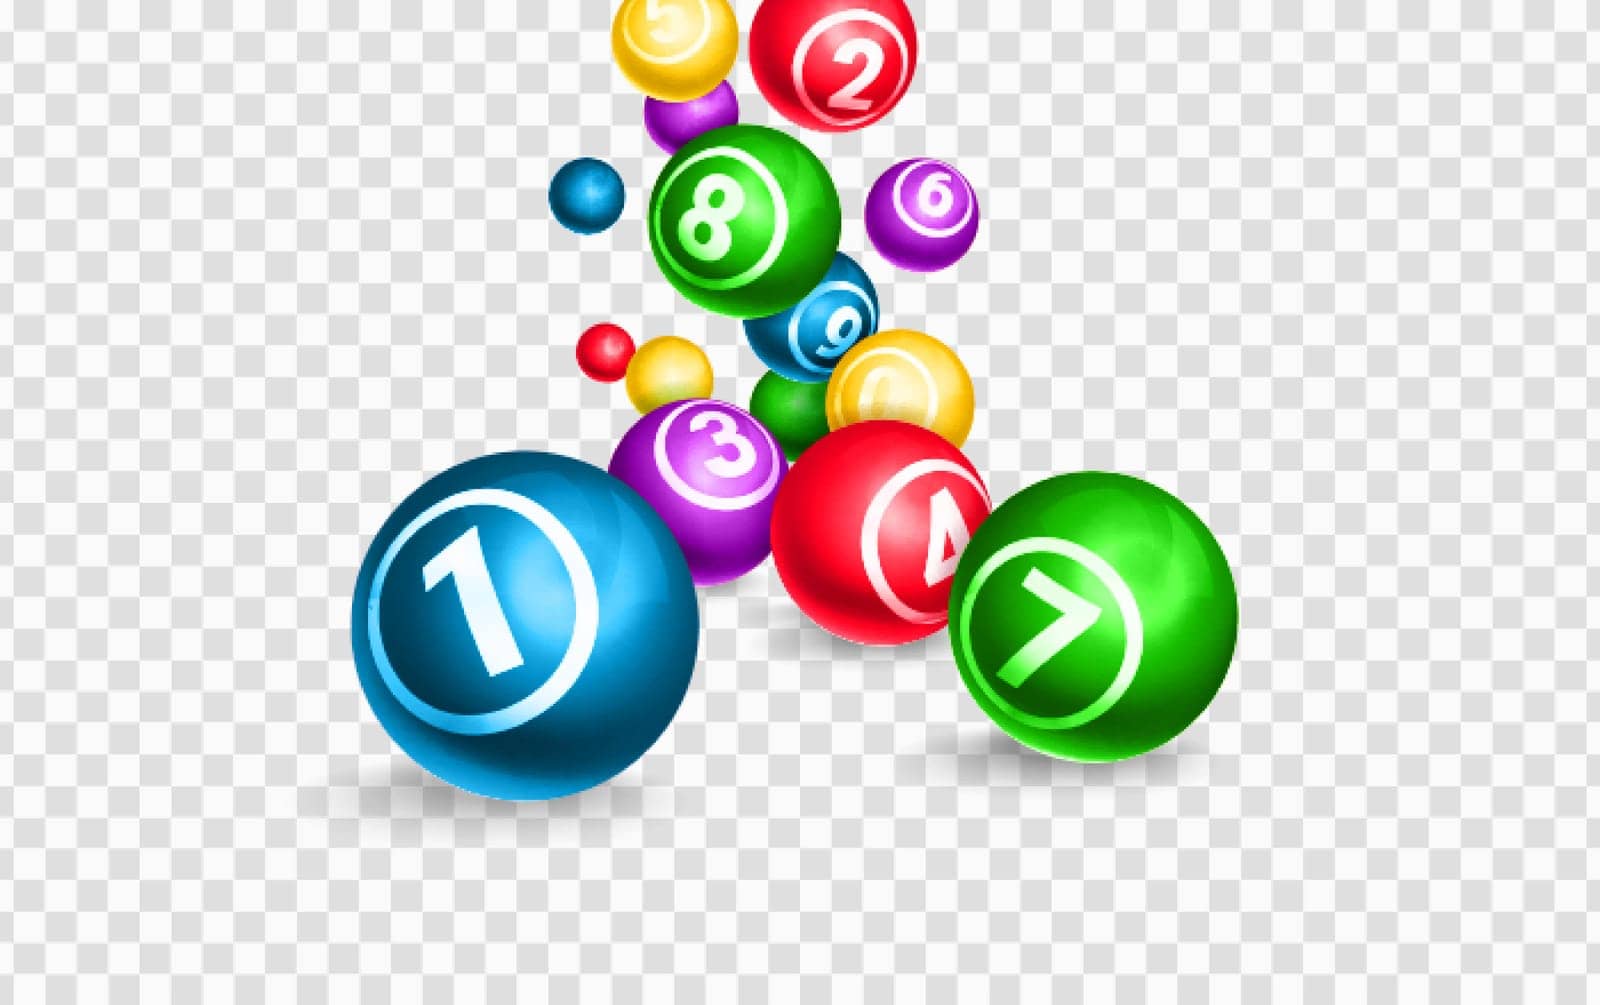 Lotto balls 3d realistic vector illustration. Colourful falling spheres with lucky winning combination numbers. Keno, bingo, lottery gambling games. Gaming leisure activity, raffle or jackpot concept.